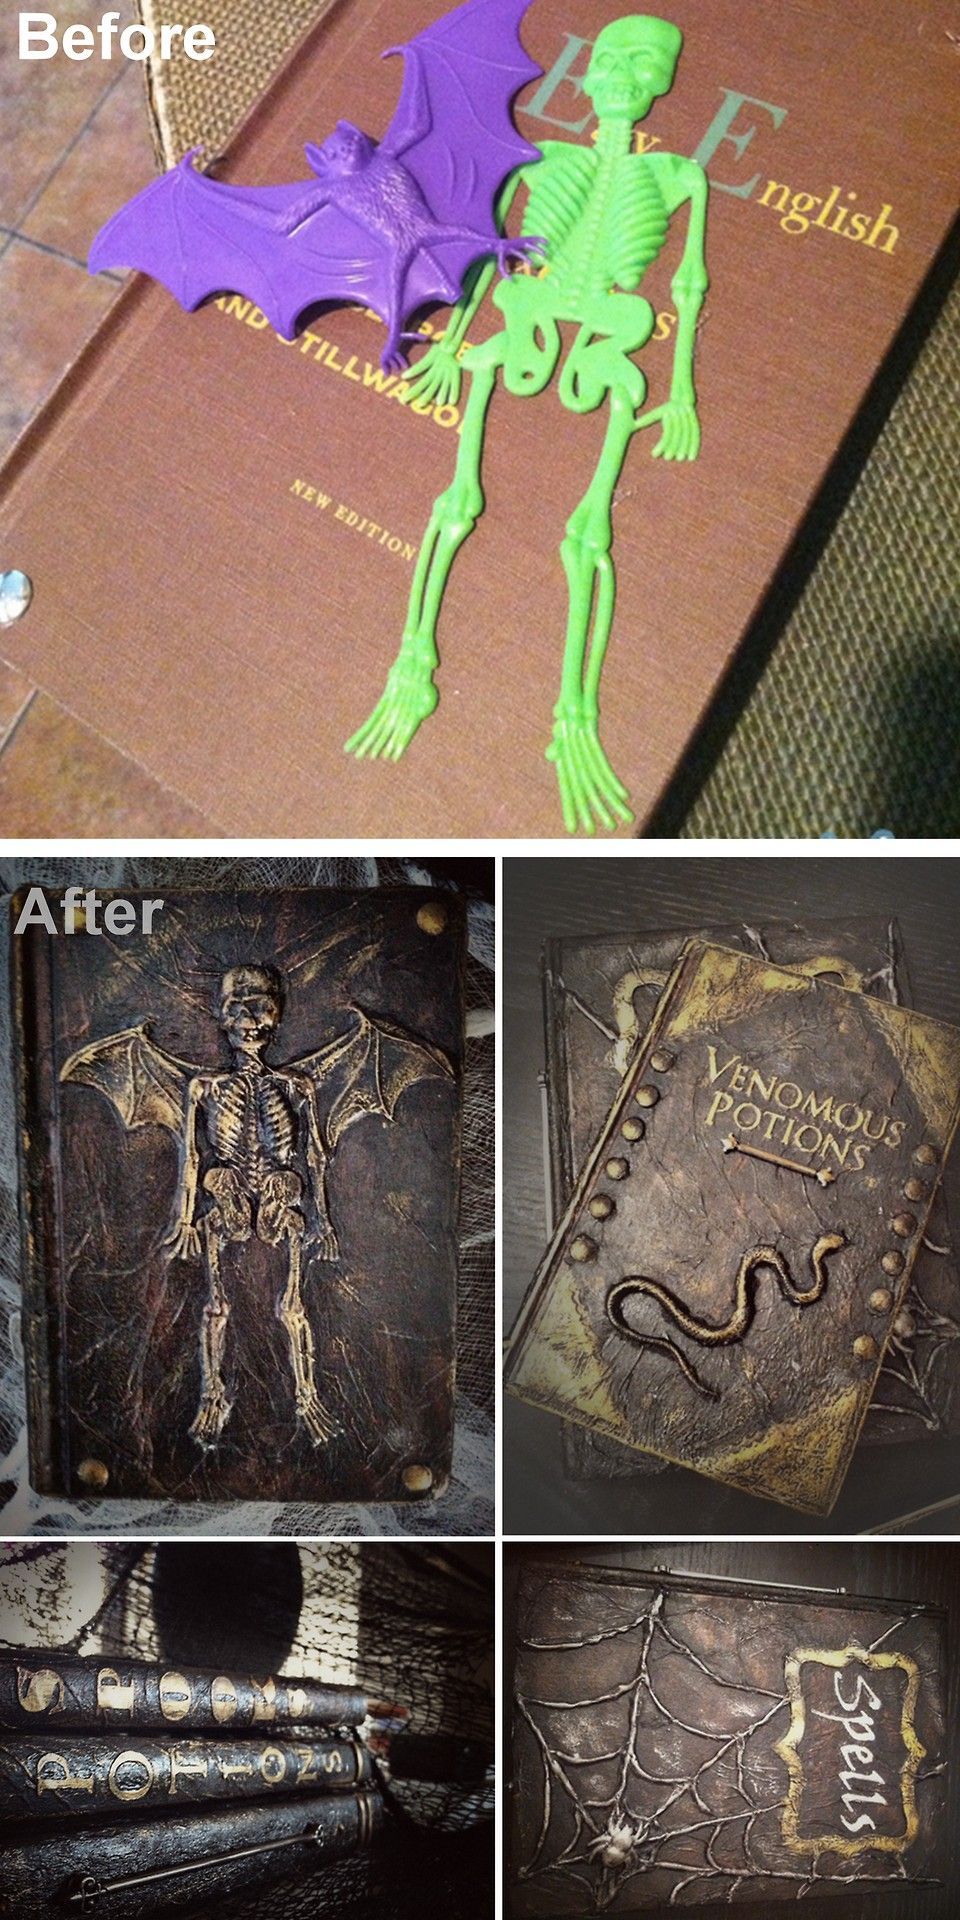 DIY Spell and Potion Book Tutorial from Better After. This is a really good tutorial using plastic toys, a glue gun, cardstock,